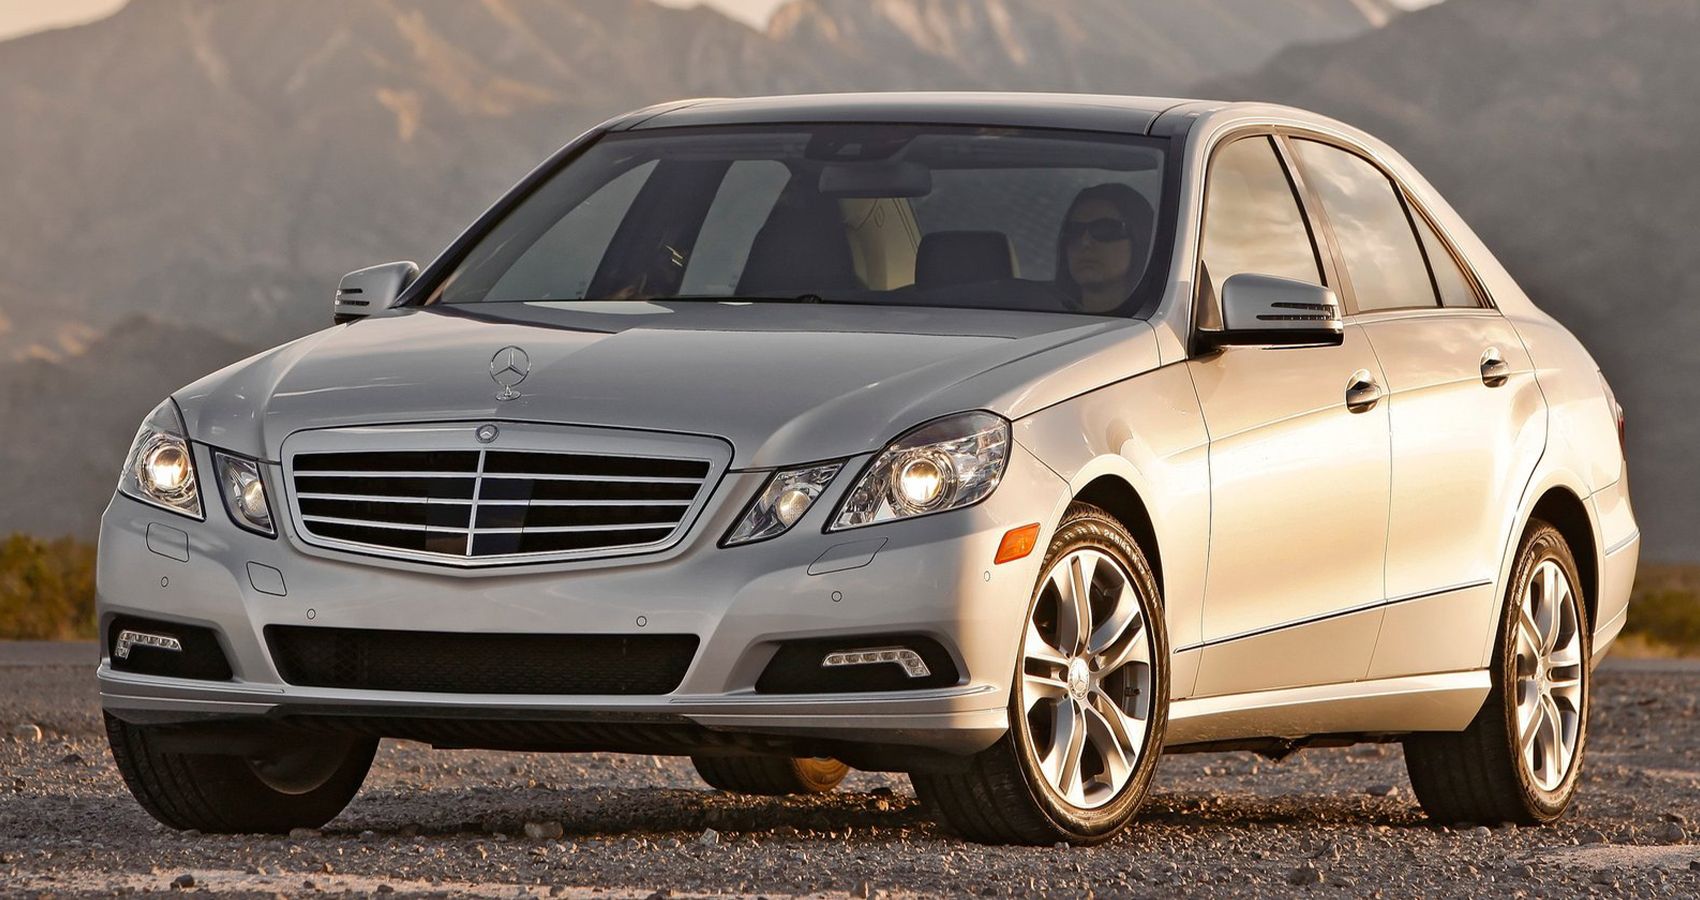 Mercedes-Benz E350 Model Years You Should Avoid Buying Used